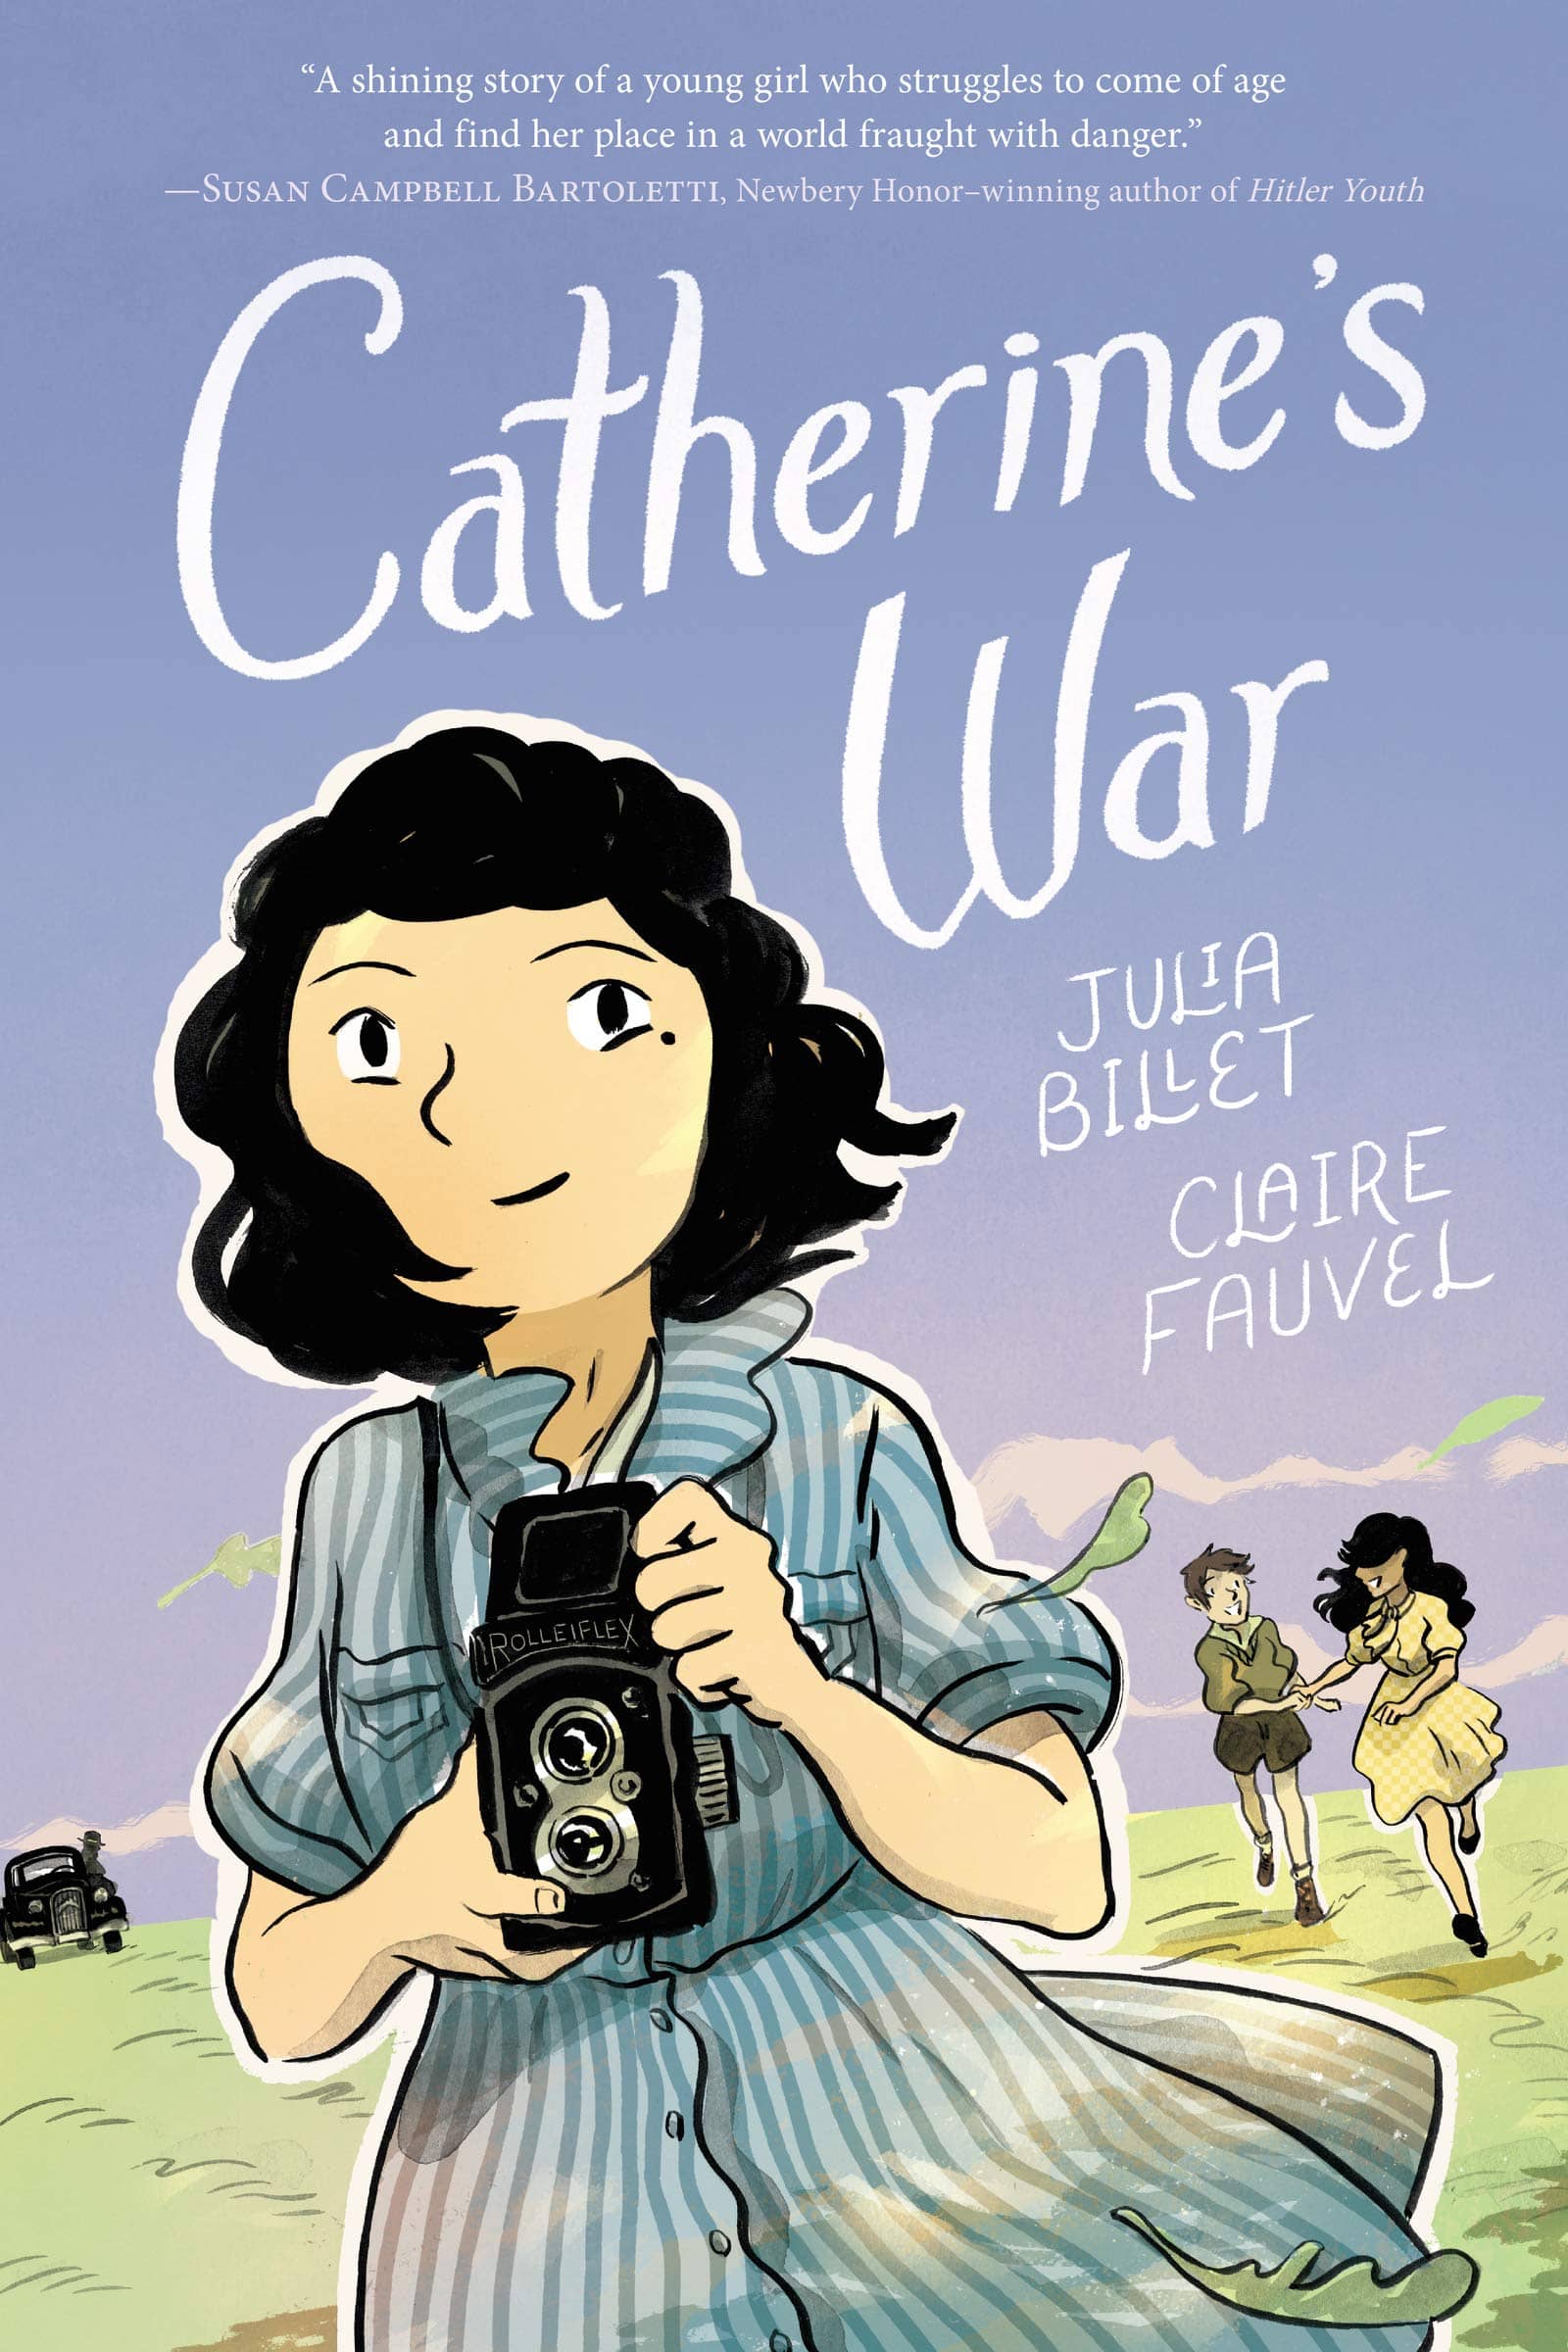 Catherine's War book cover